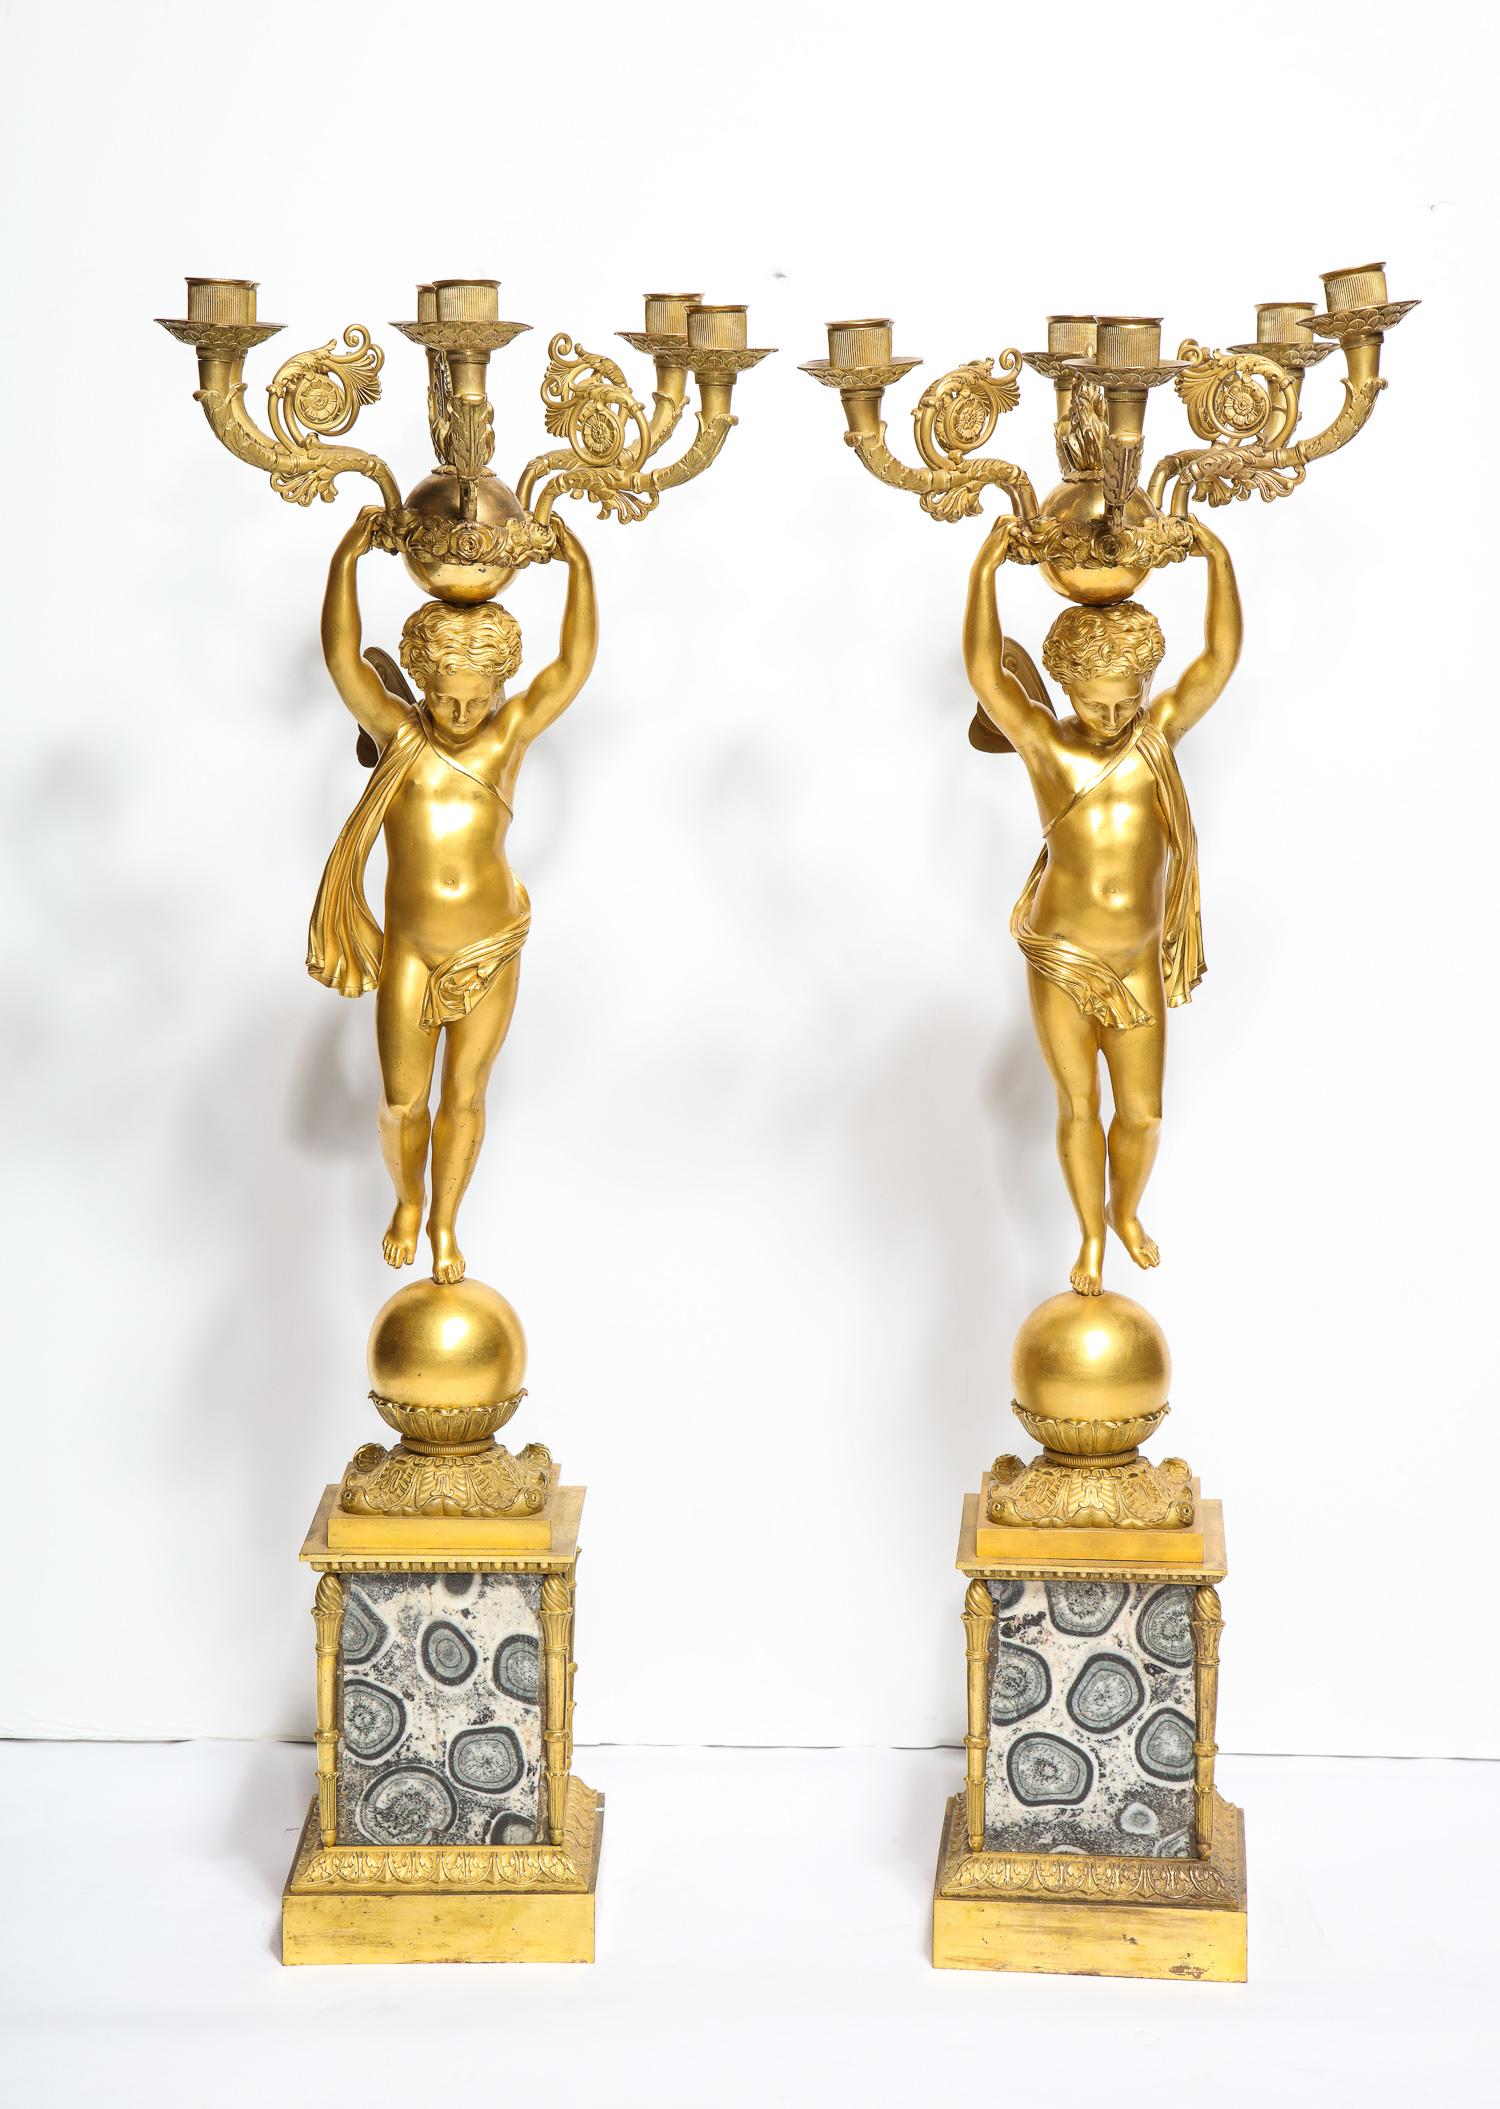 Large pair of French Empire ormolu bronze candelabra on granito (granite) orbicolare bases, circa 1820.

Exquisite quality ormolu candelabra on very rare original granite bases.

The winged figures depicting two cherubs, each holding the